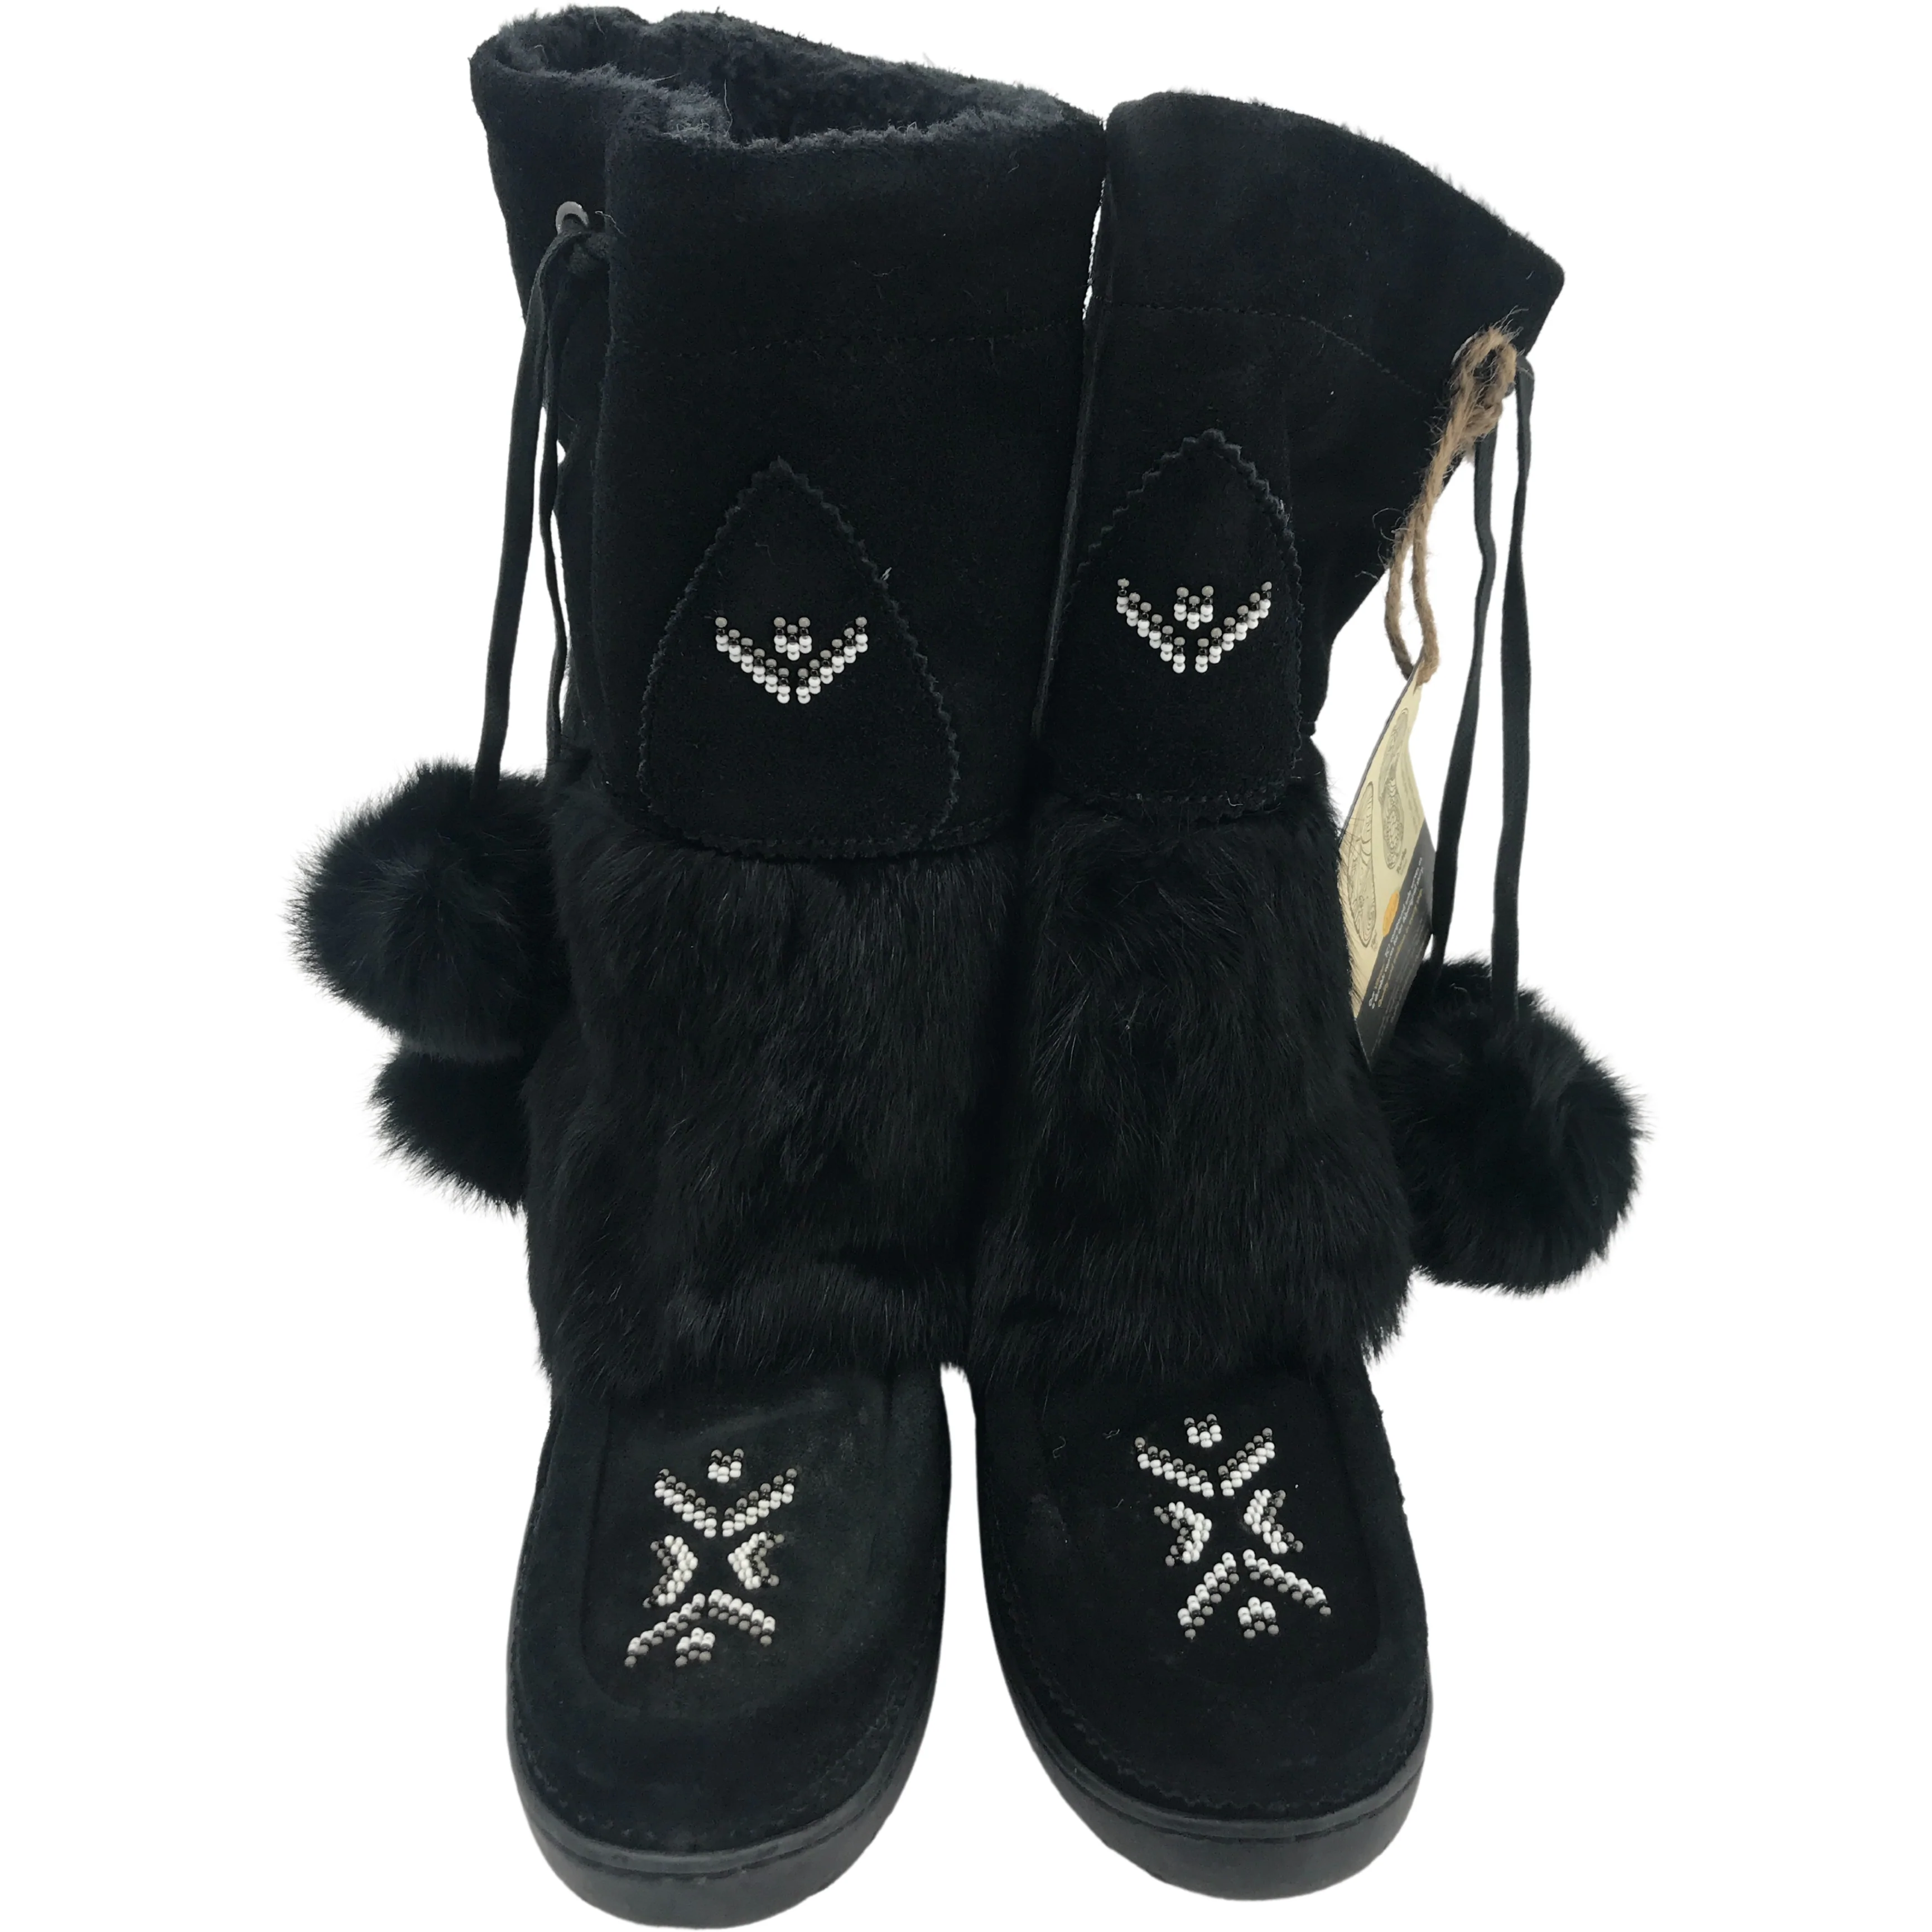 Manitobah Mukluks Women's Winter Boots / Tall Boots / Black / Fur / Size 8